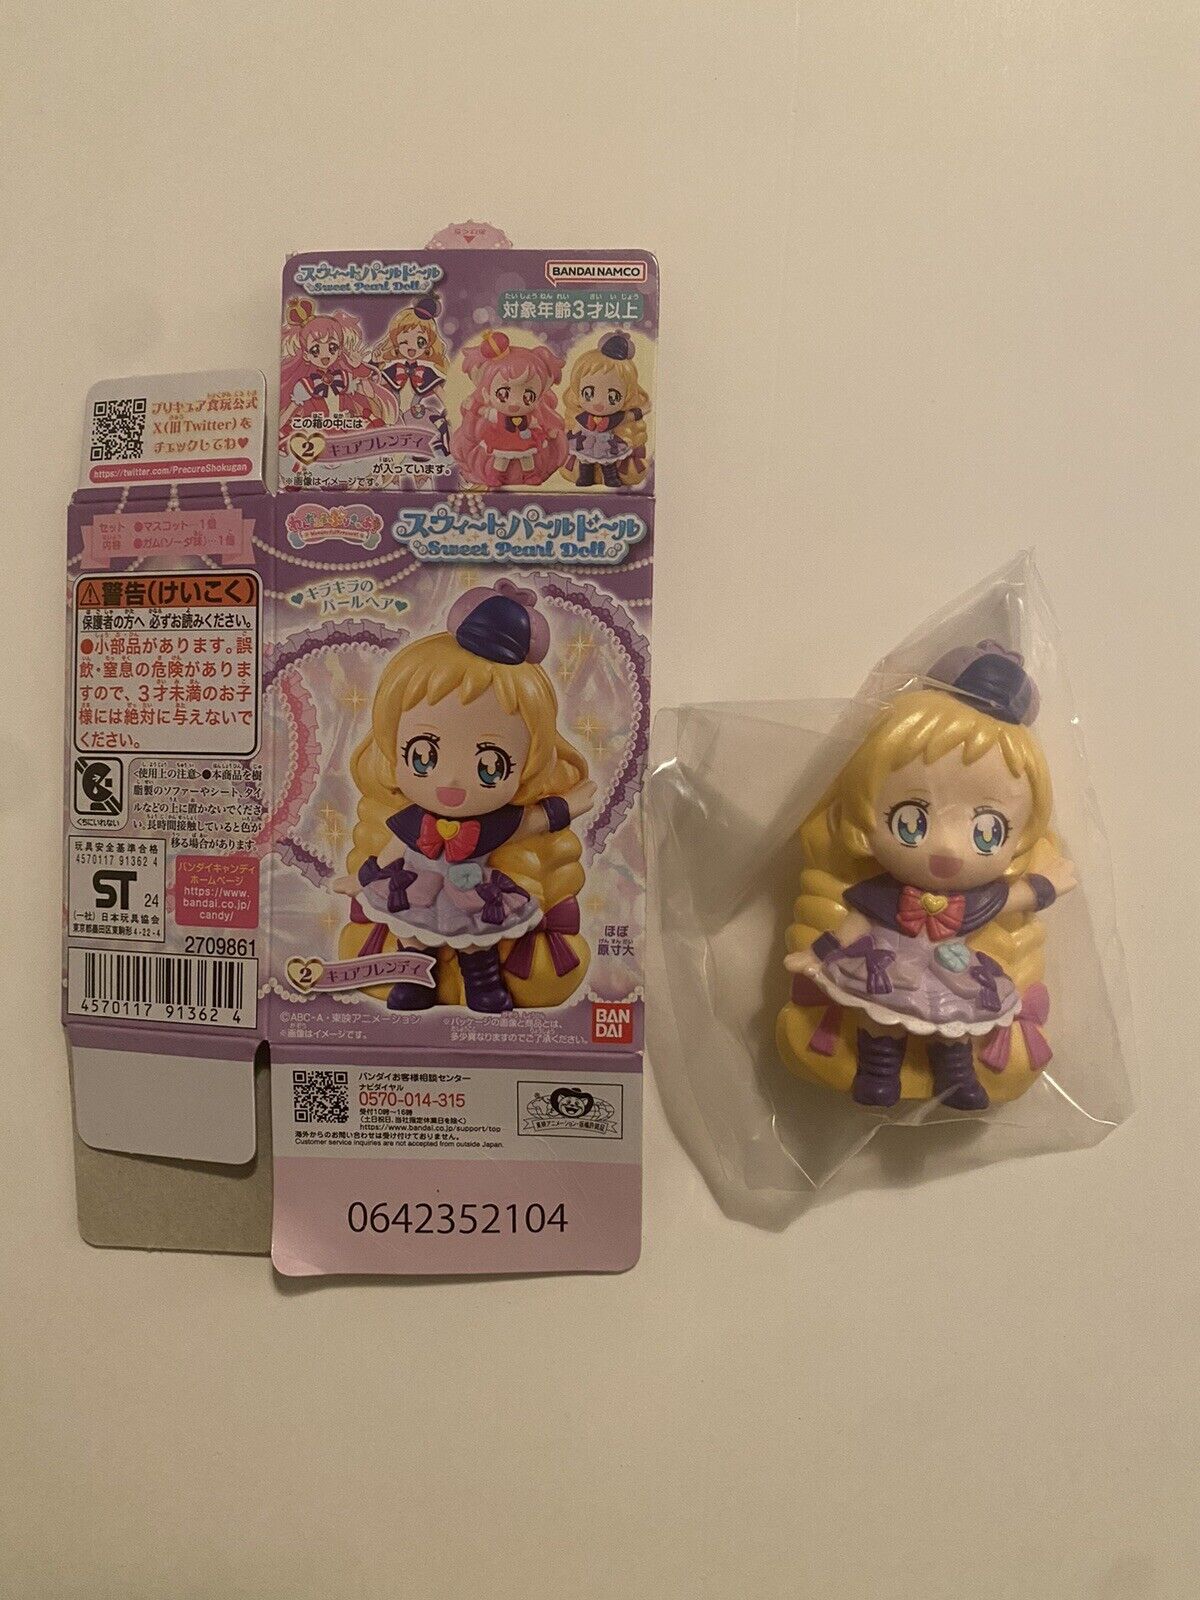 Wonderful Precure sweet pearl doll Cure Friendly *SHIPS FROM US*